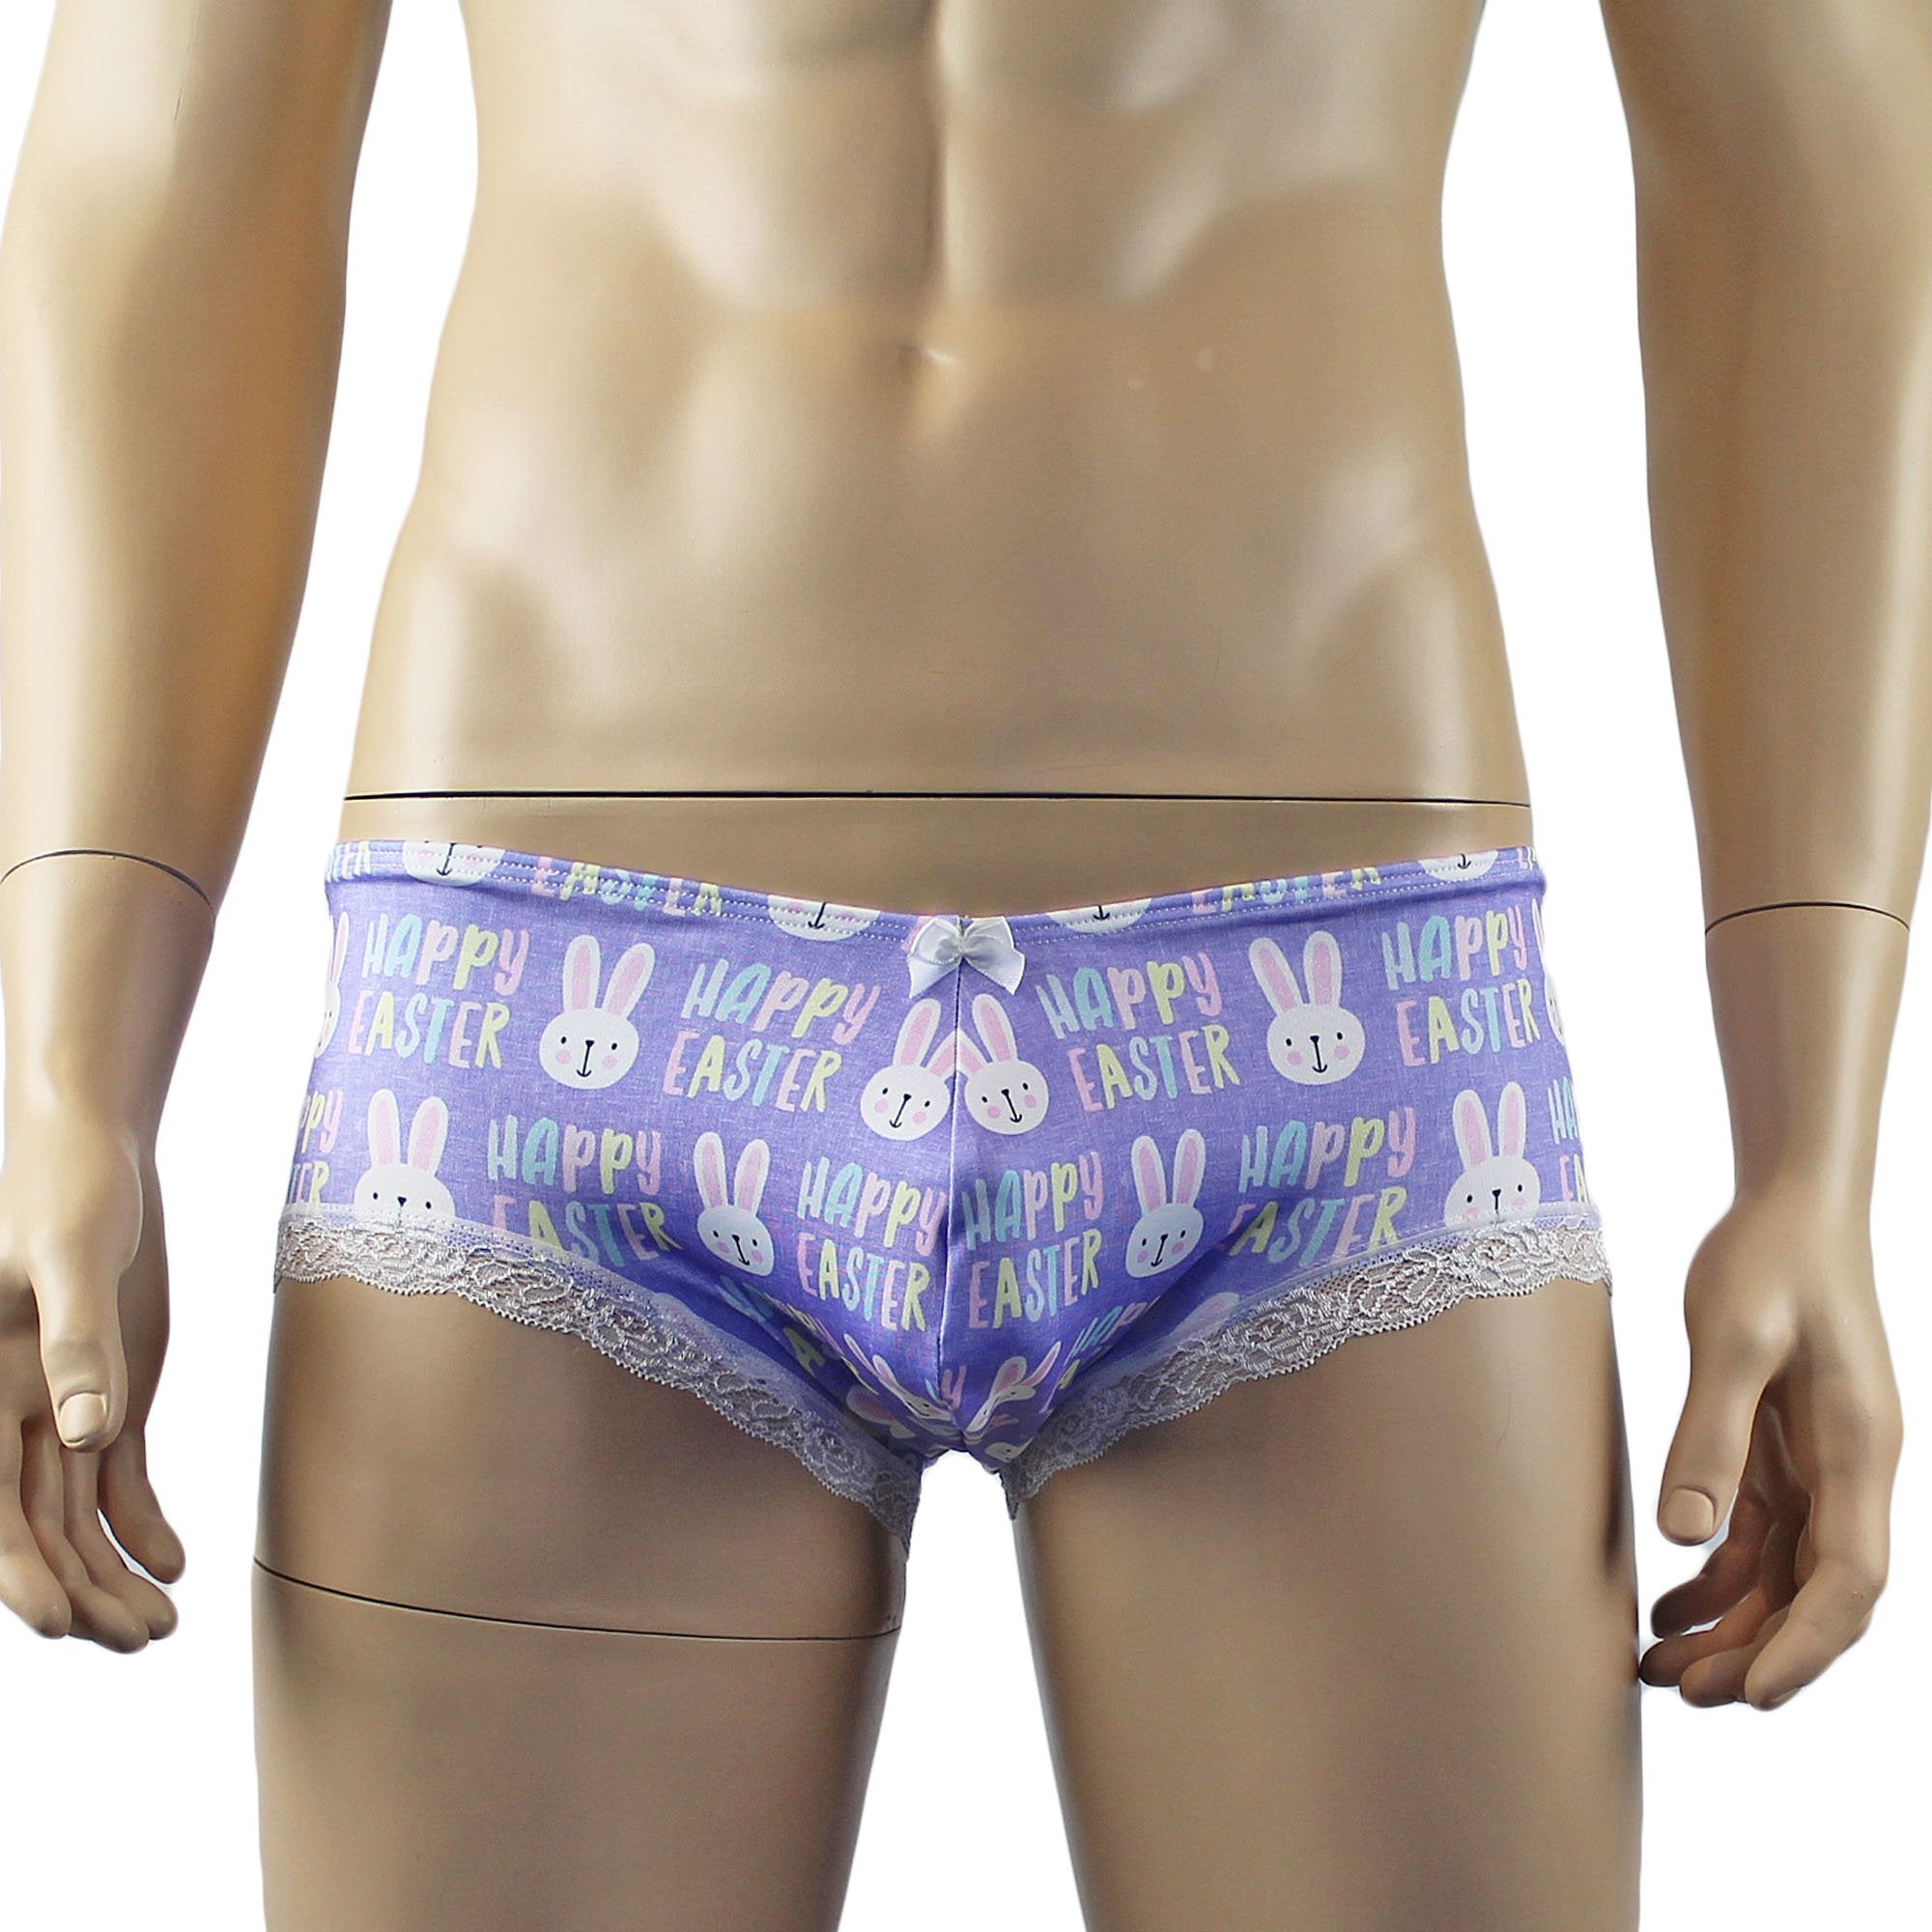 Mens Happy Easter Mens Lingerie Stretch Spandex & Lace Panty Brief